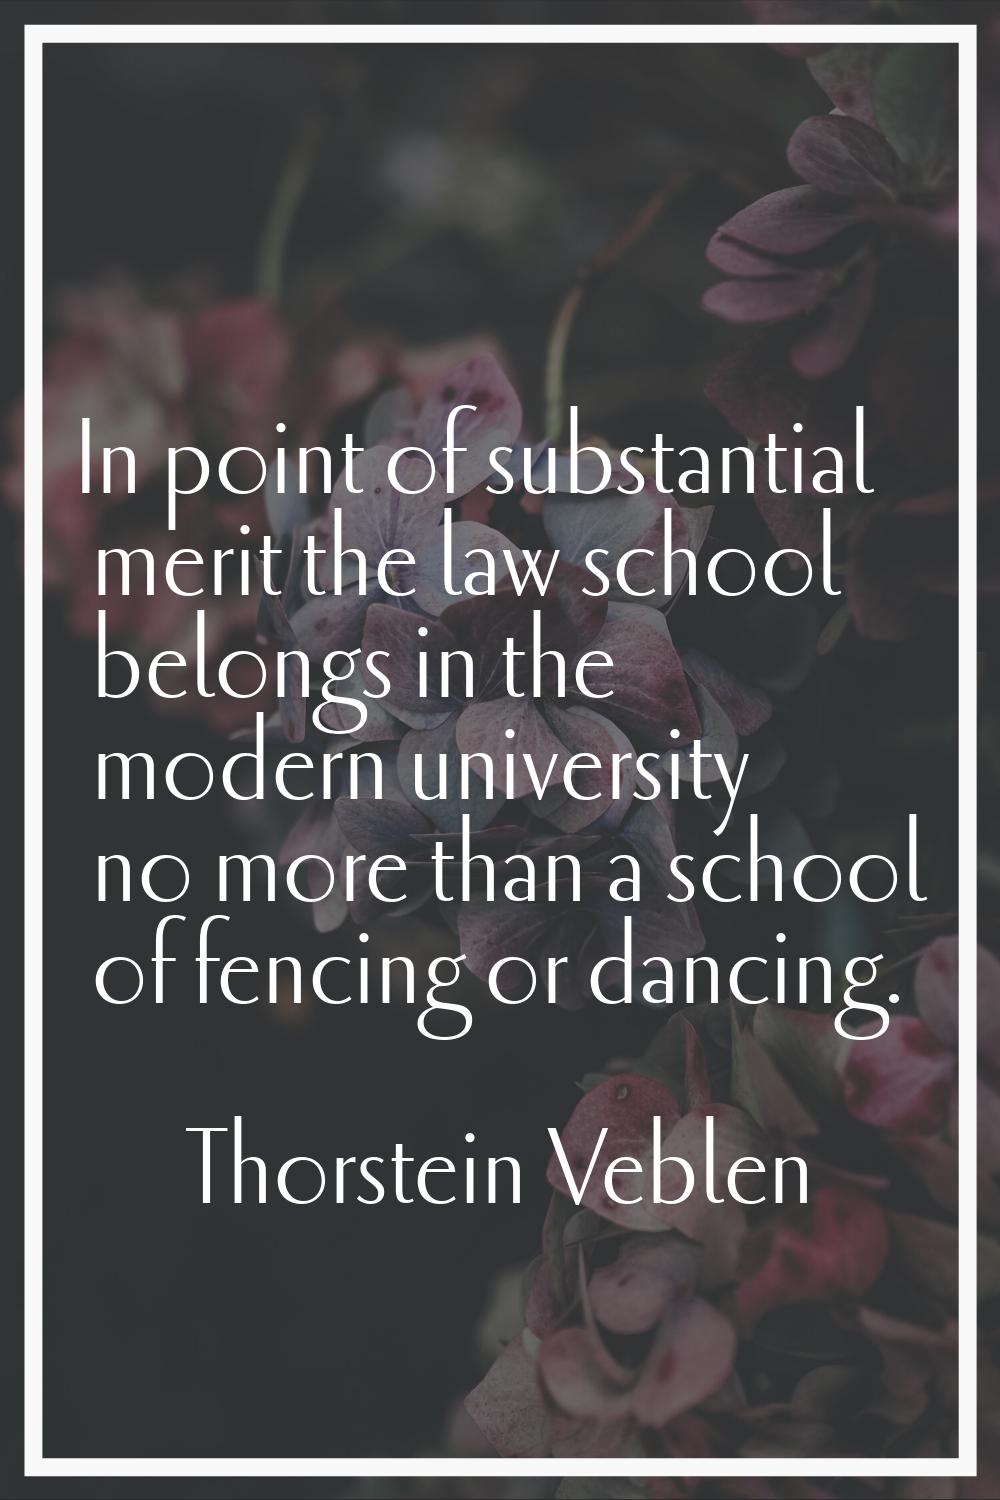 In point of substantial merit the law school belongs in the modern university no more than a school